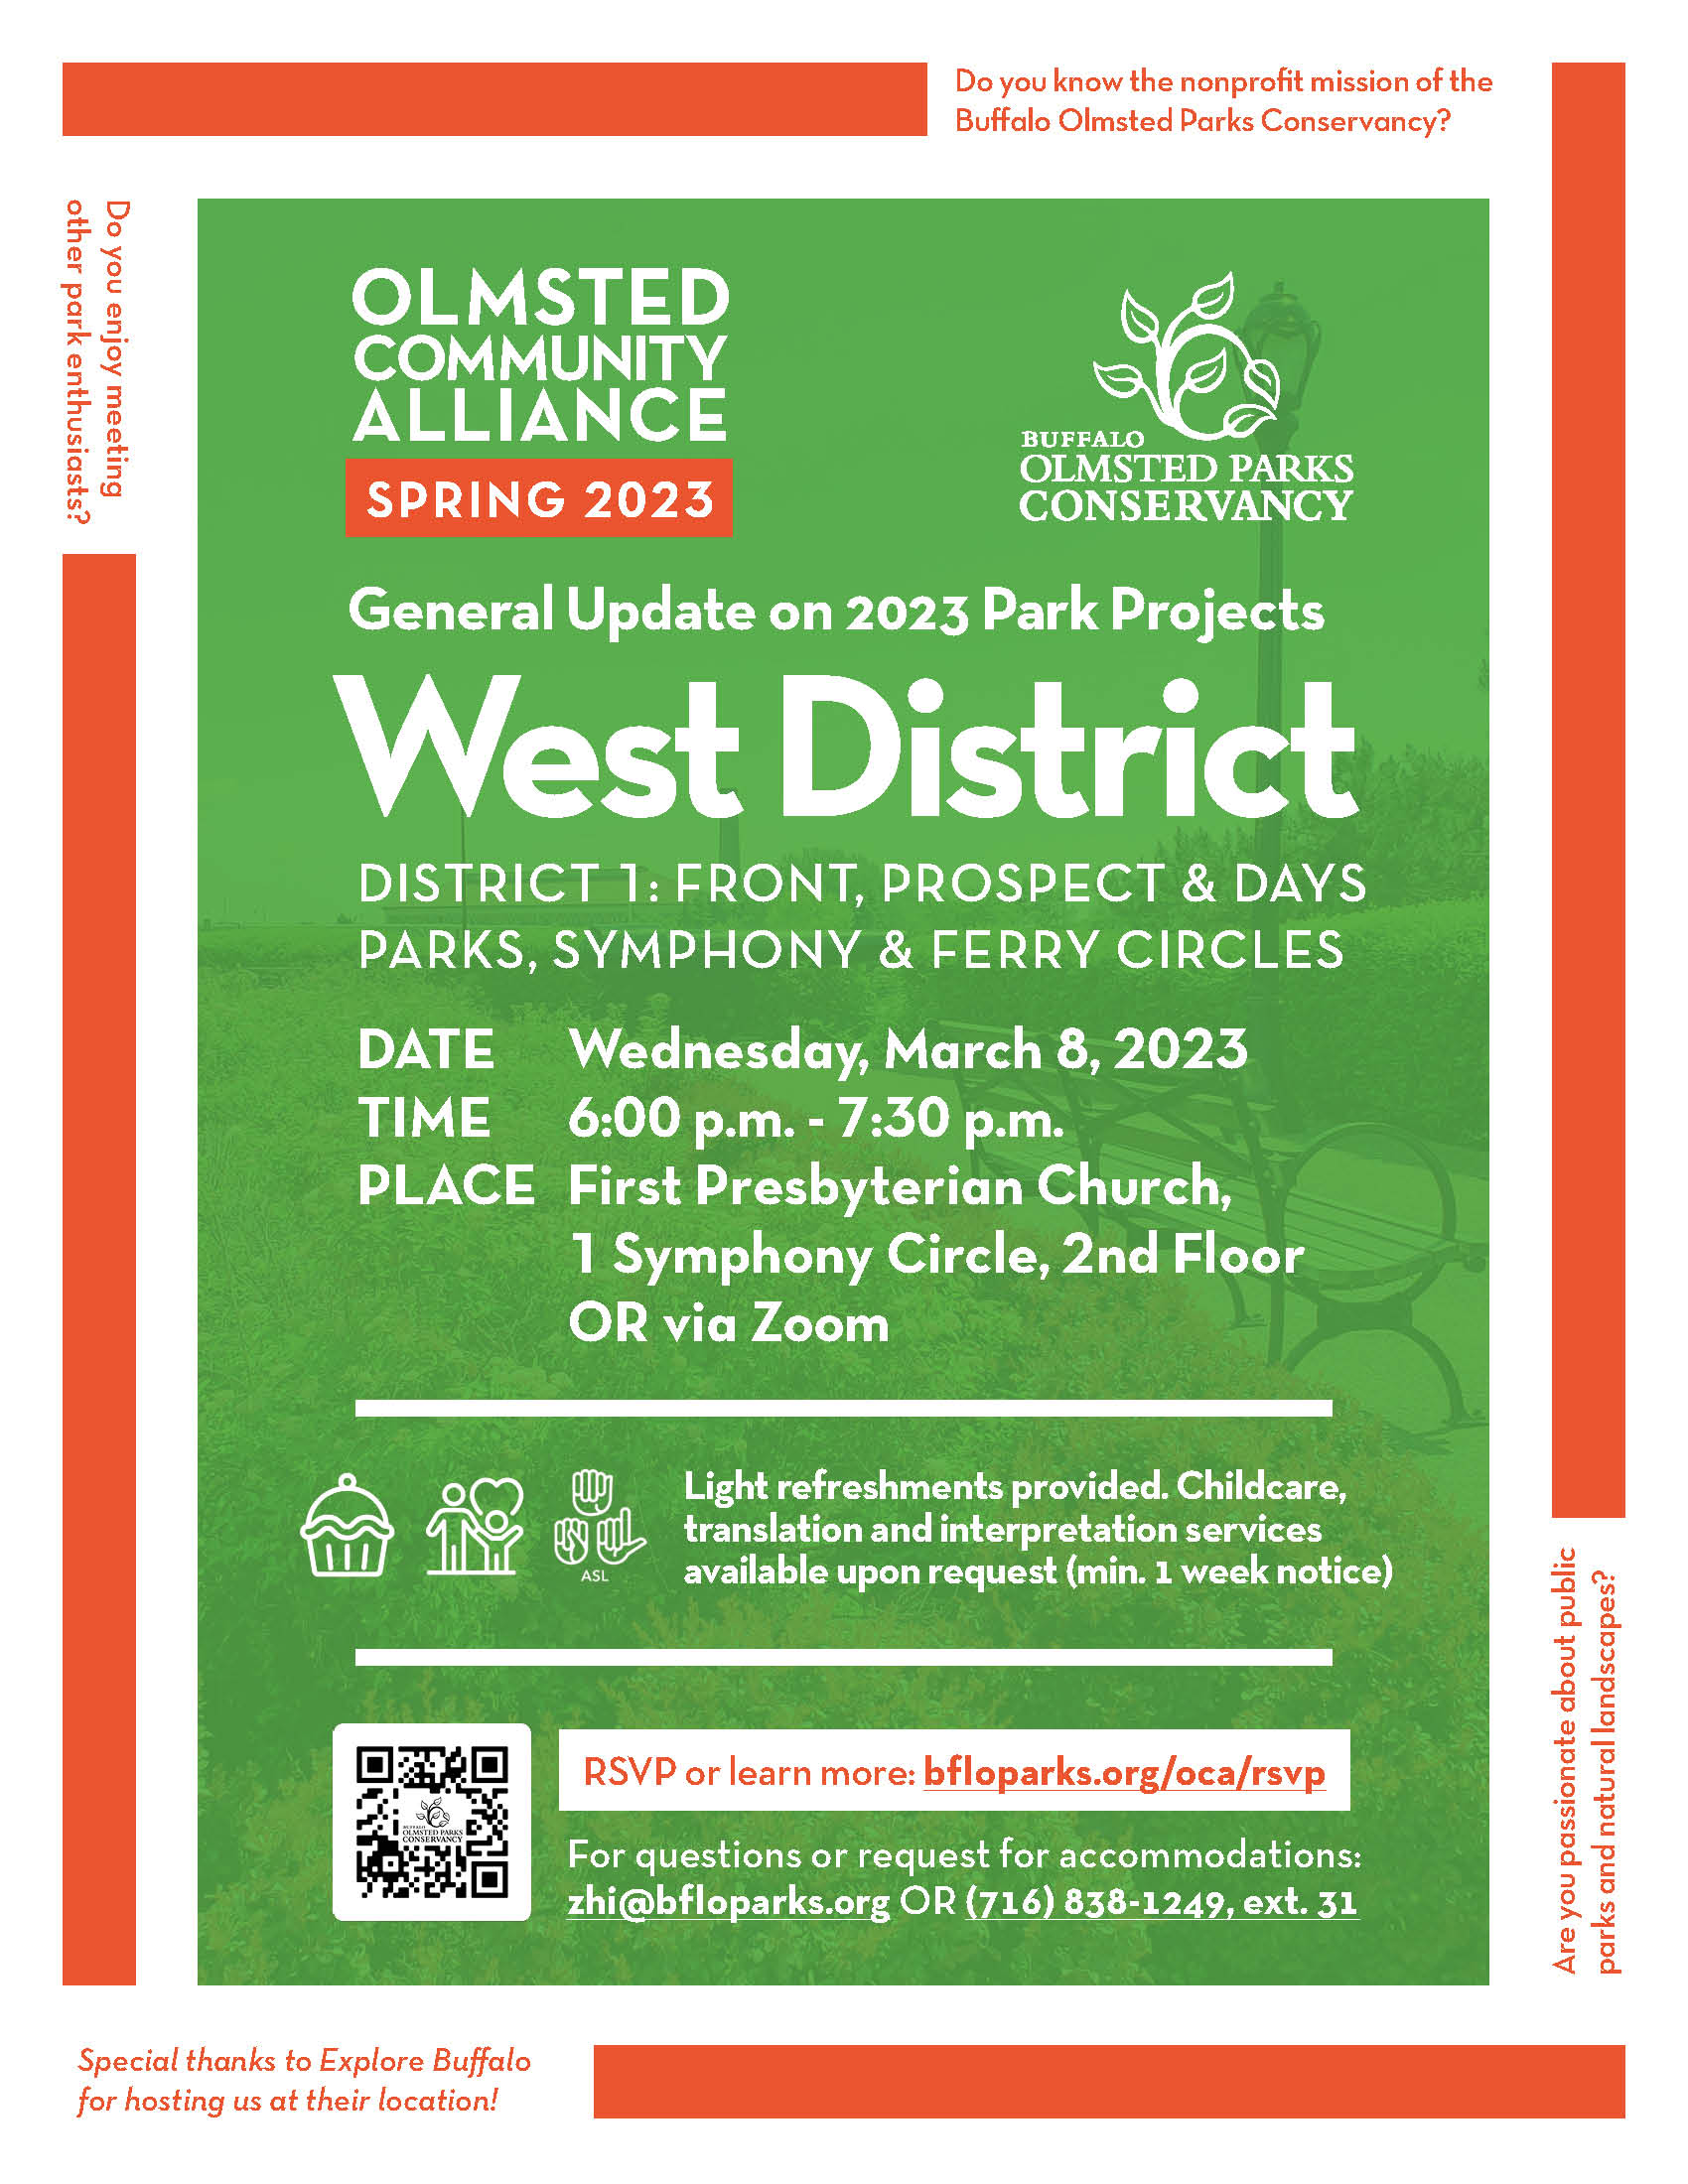 Flyer of the West District Meeting on March 8, 2023